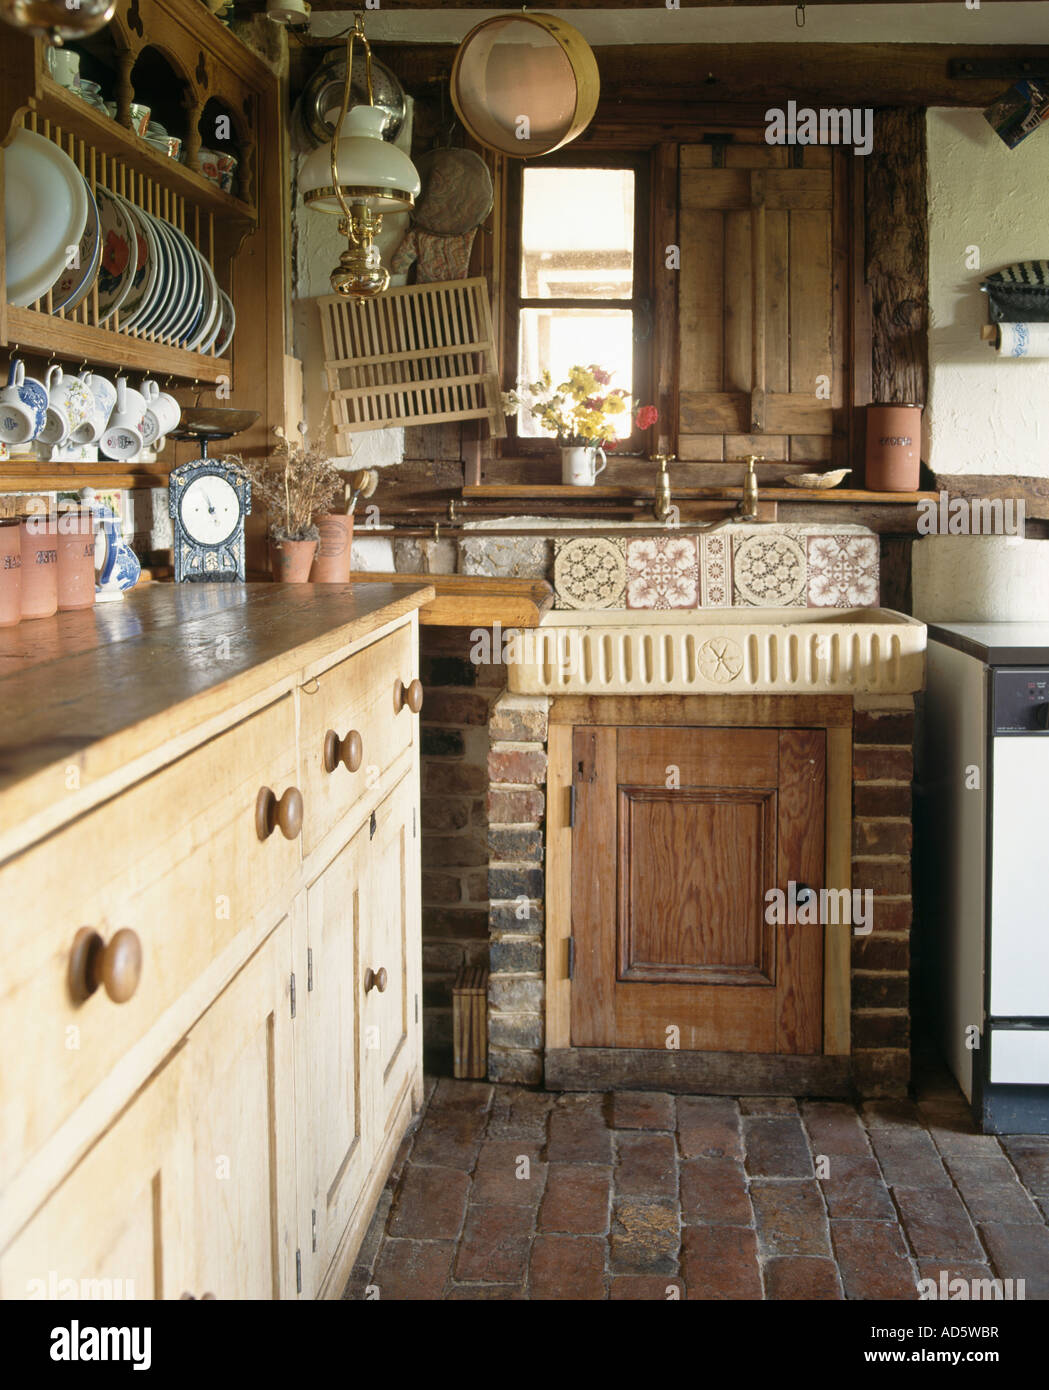 Earthenware Sink And Antique Pine Dresser In Small Cottage Kitchen